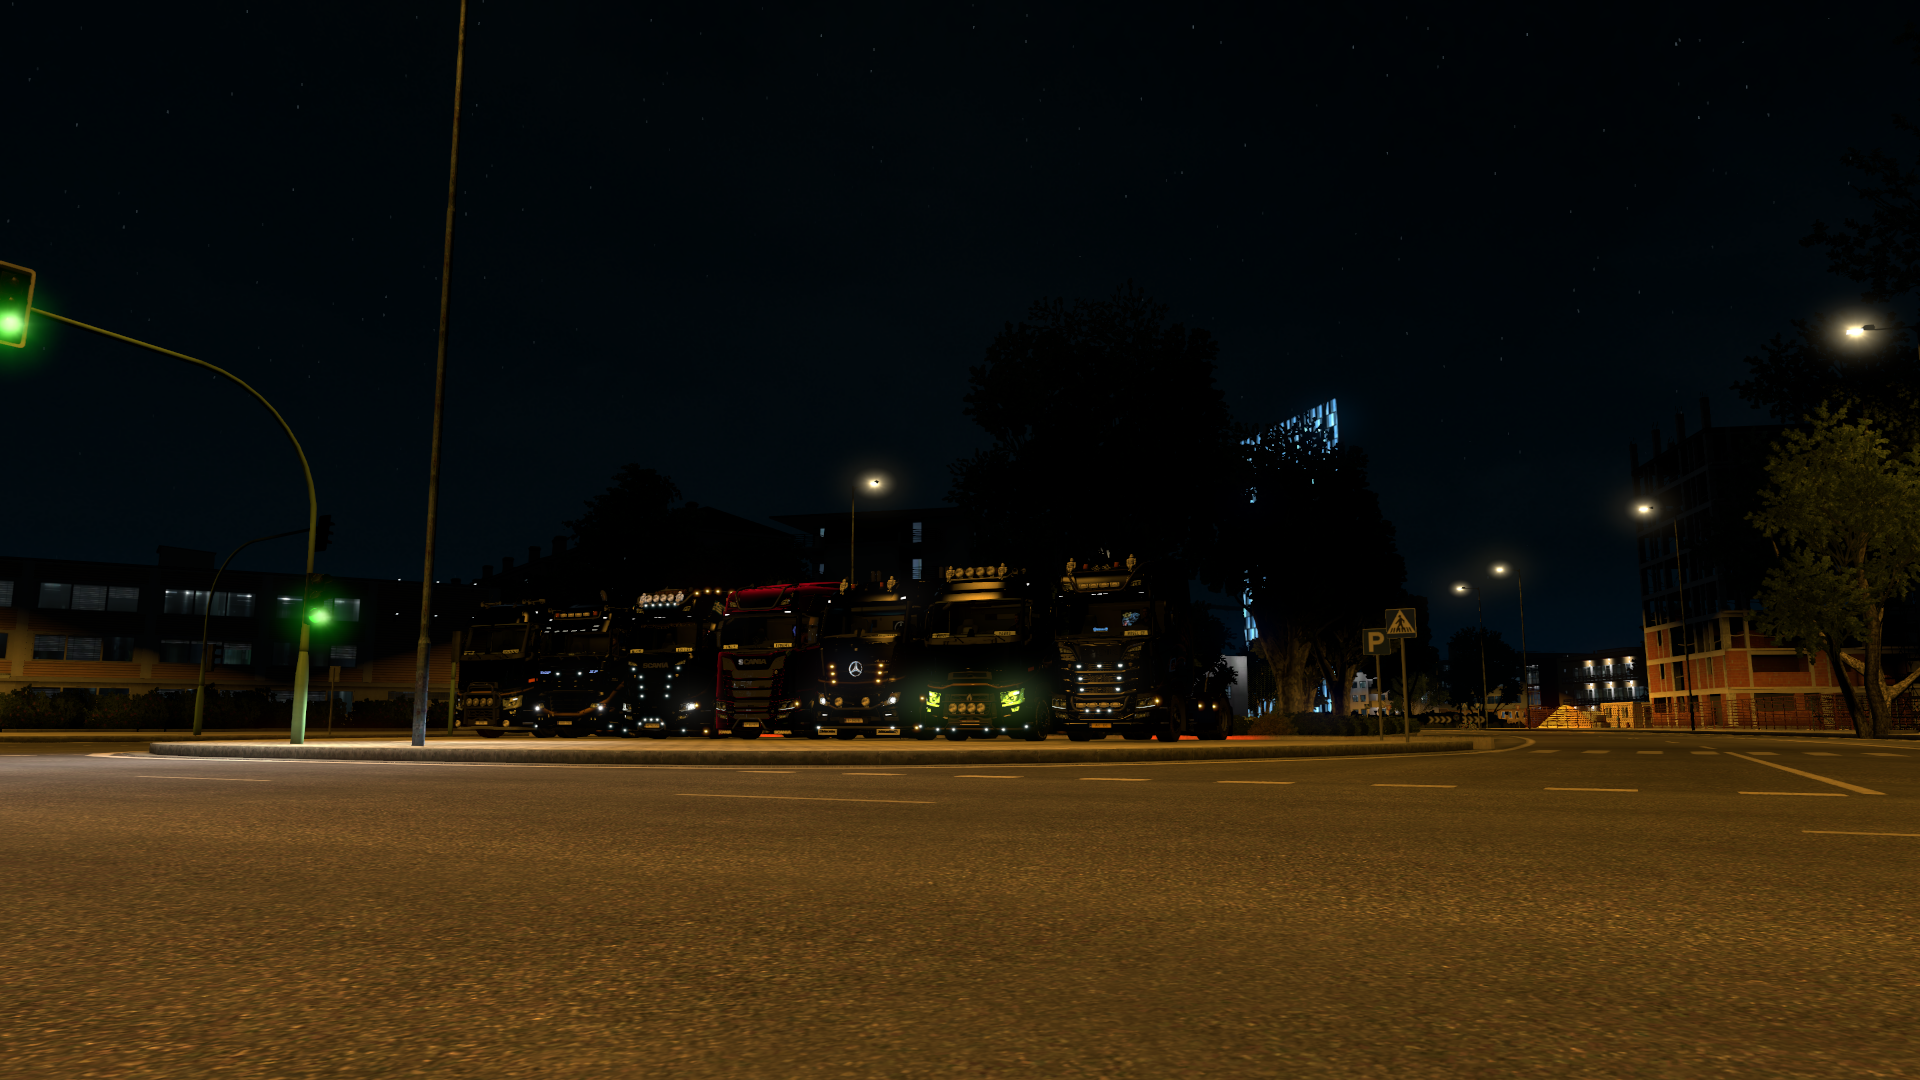 ets2_20210328_010240_00.png